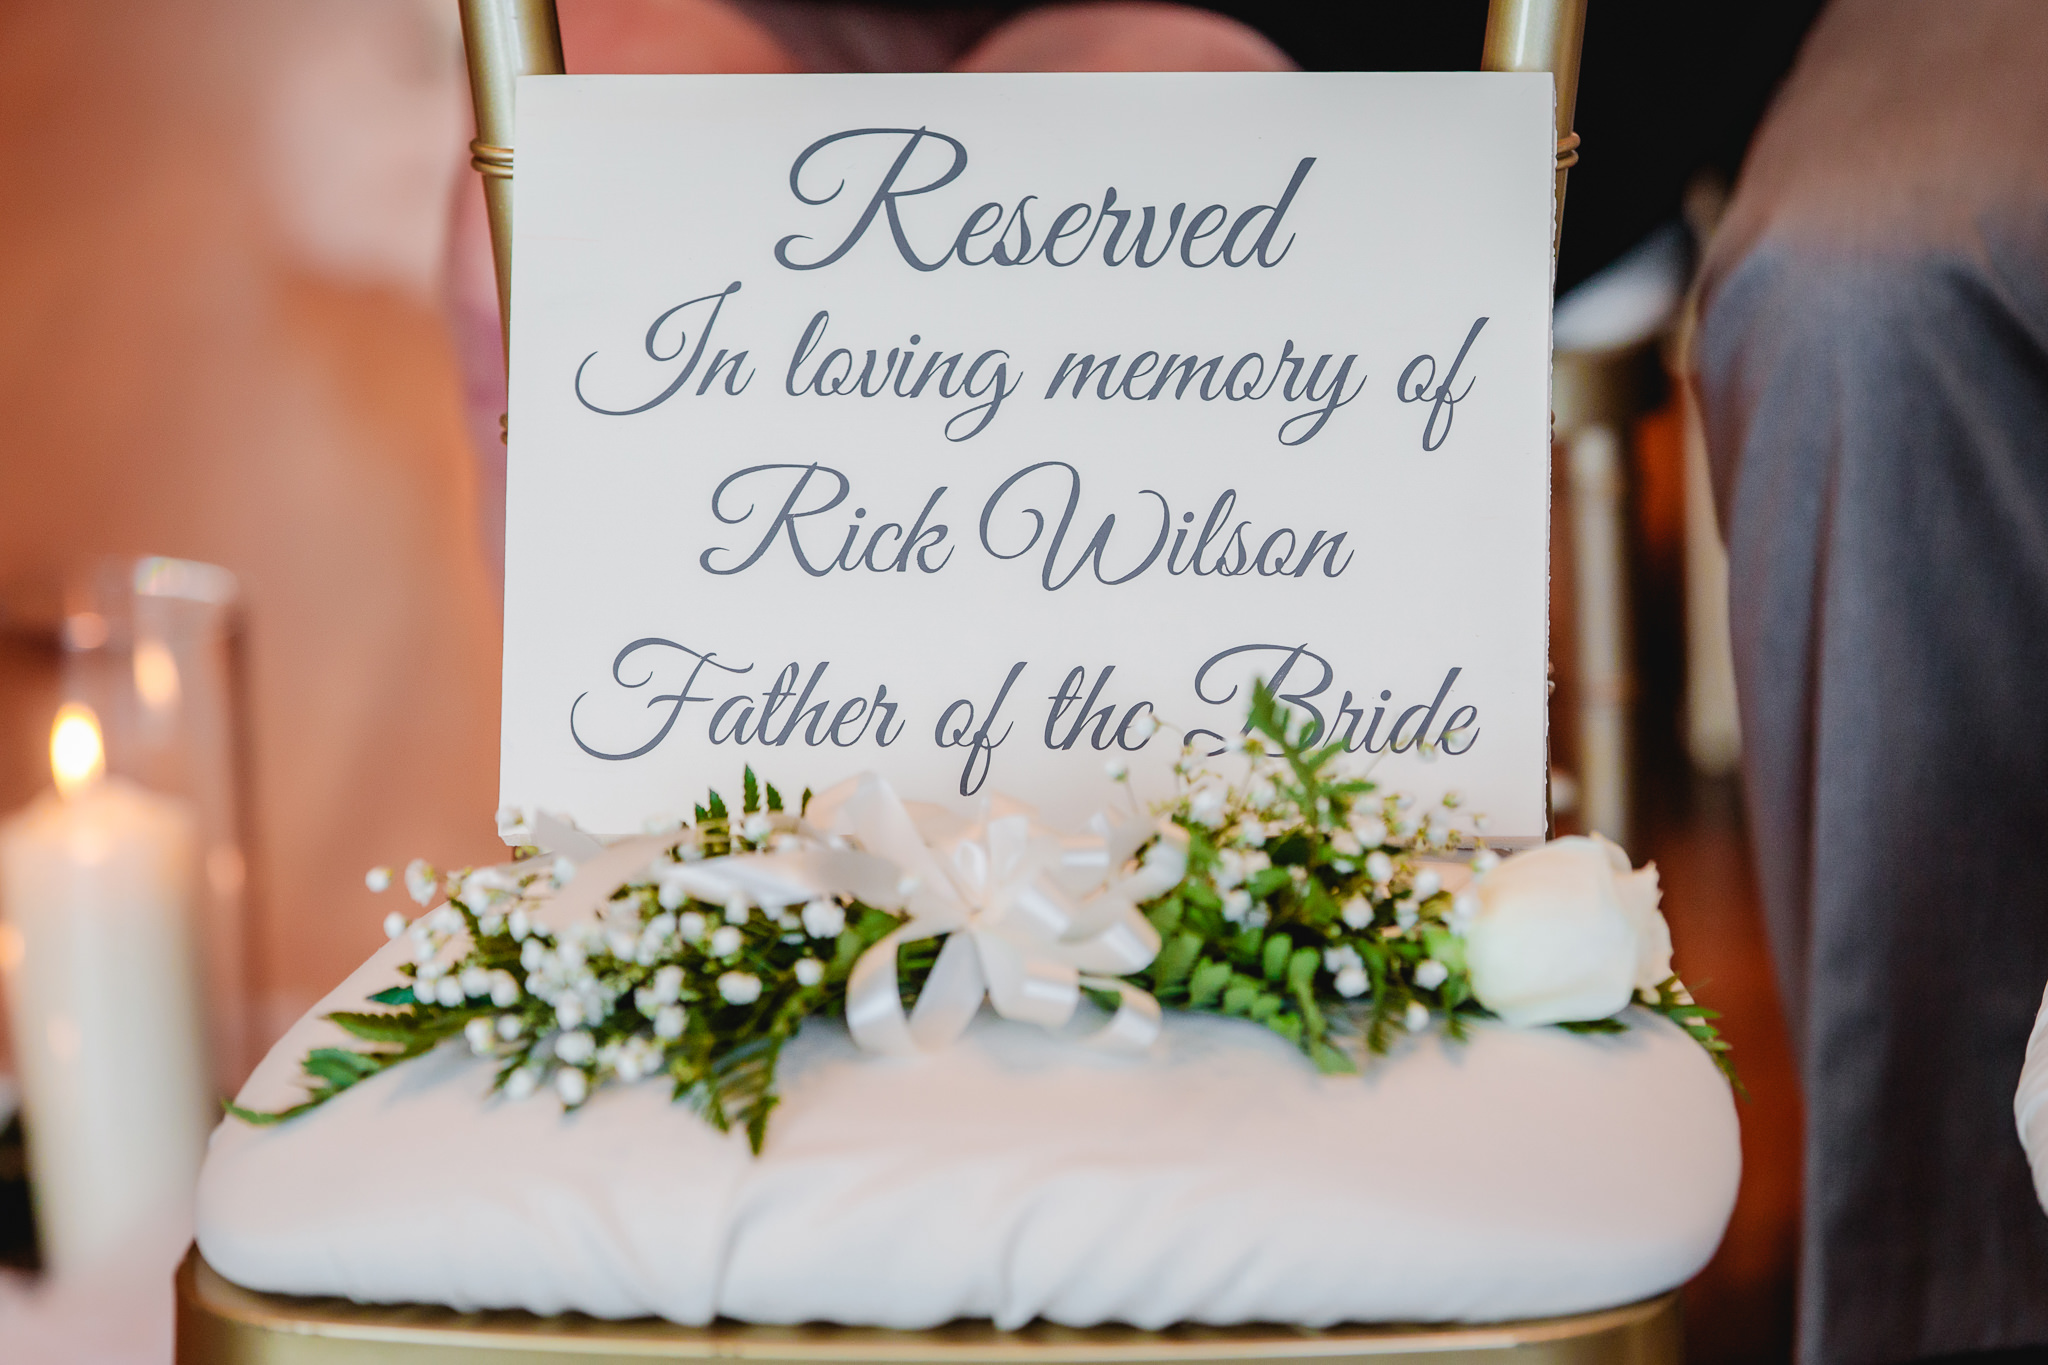 Reservation sign during ceremony for bride's late father